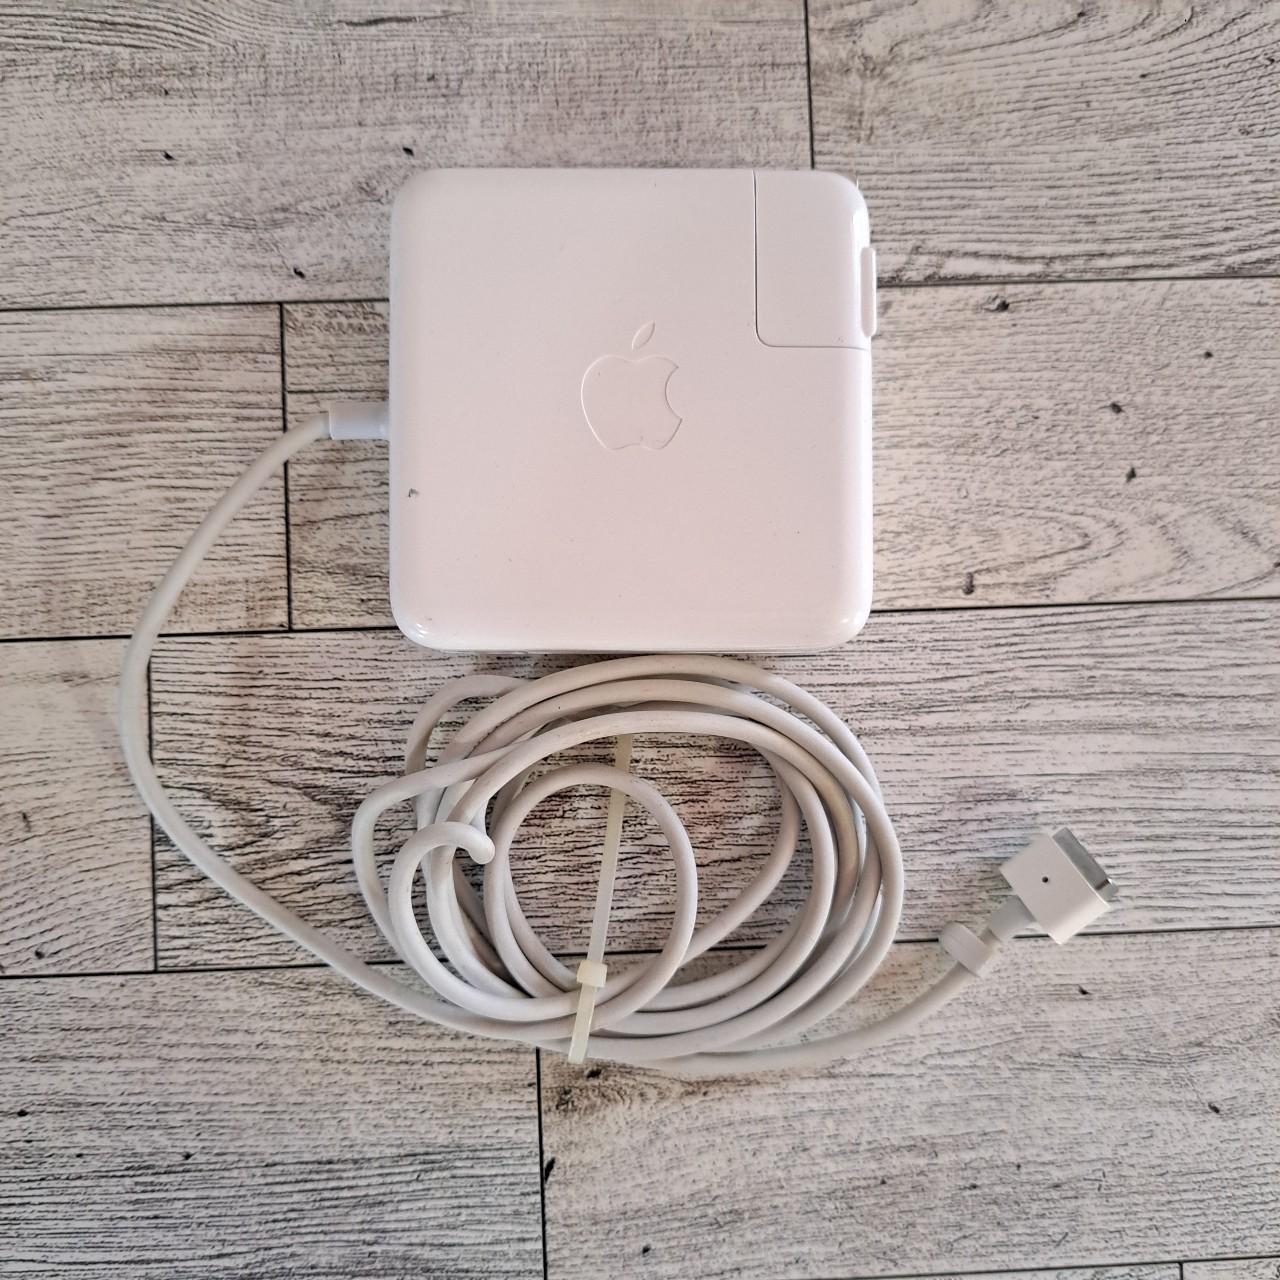 Quality 60w magsafe power adapter At Great Prices 